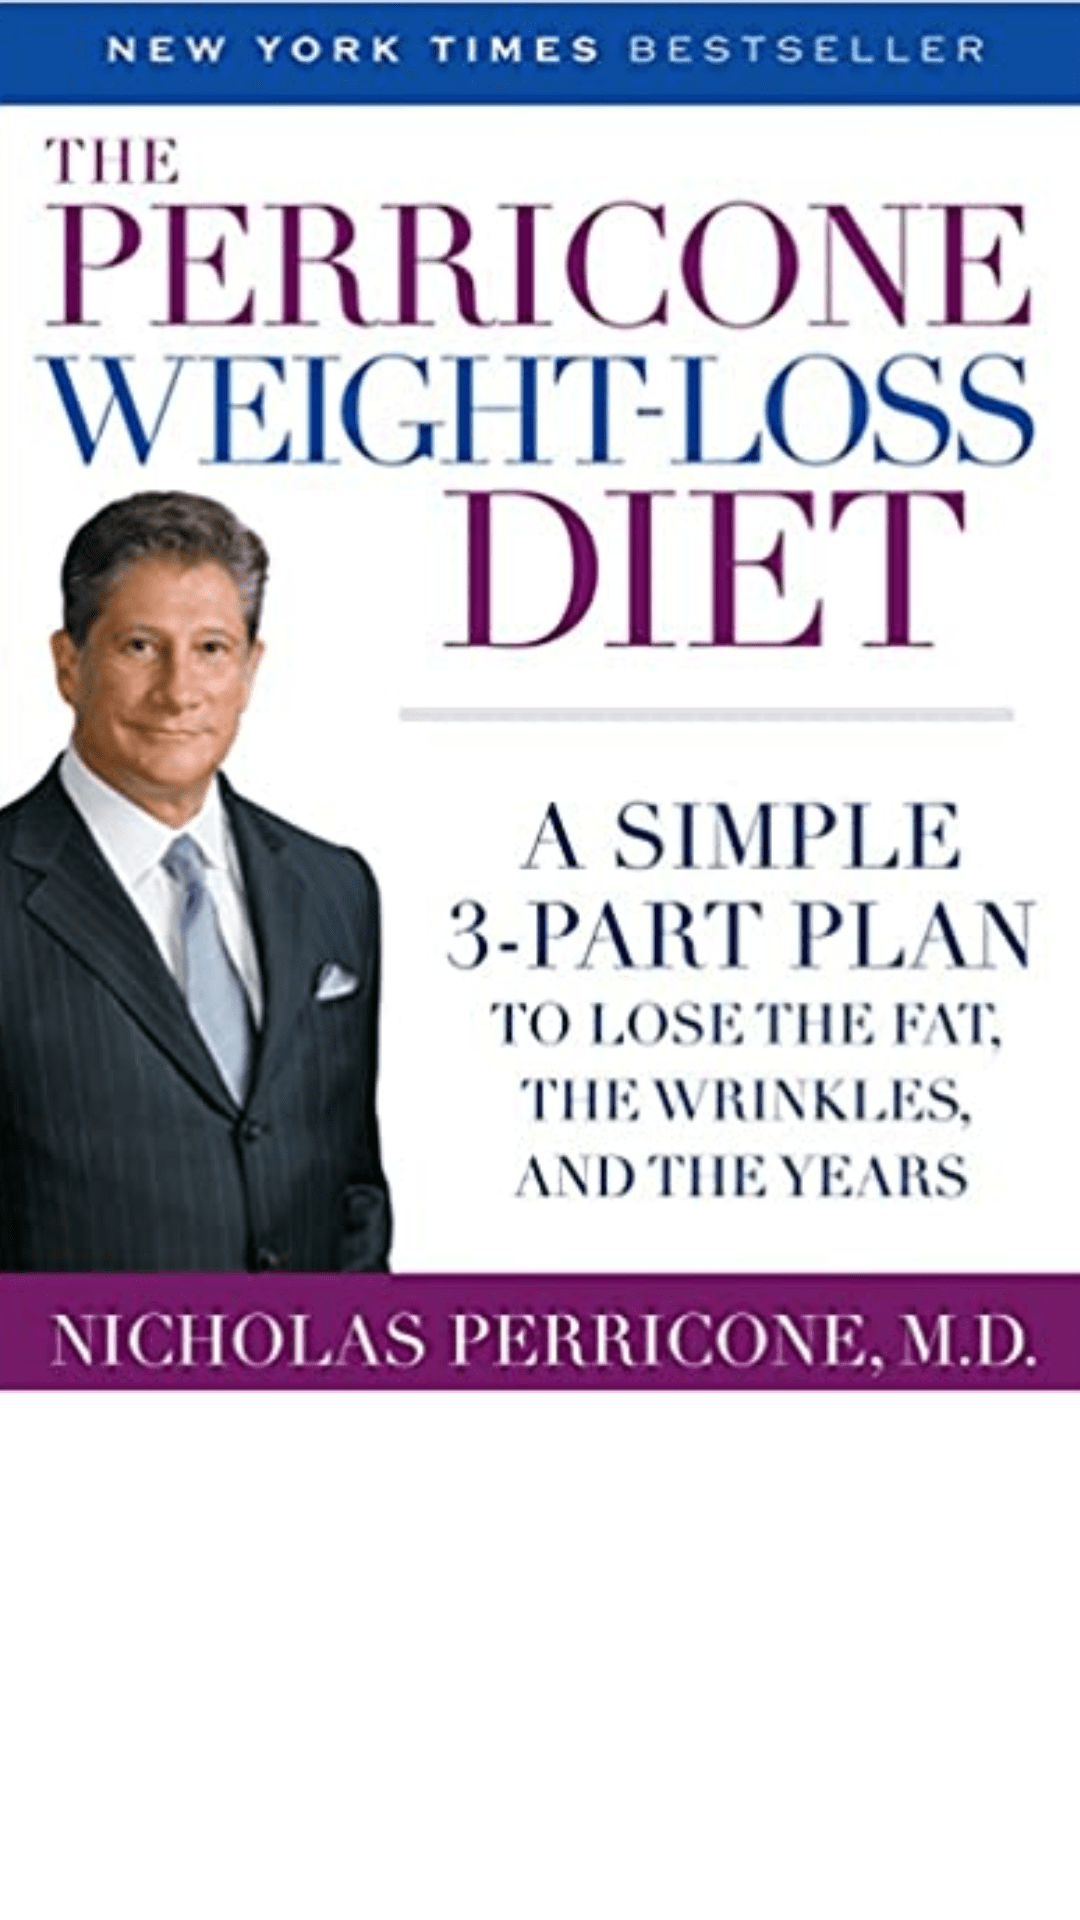 The Perricone Weight-loss Diet: A Simple 3-part Plan to Lose the Fat, the Wrinkles, and the Years